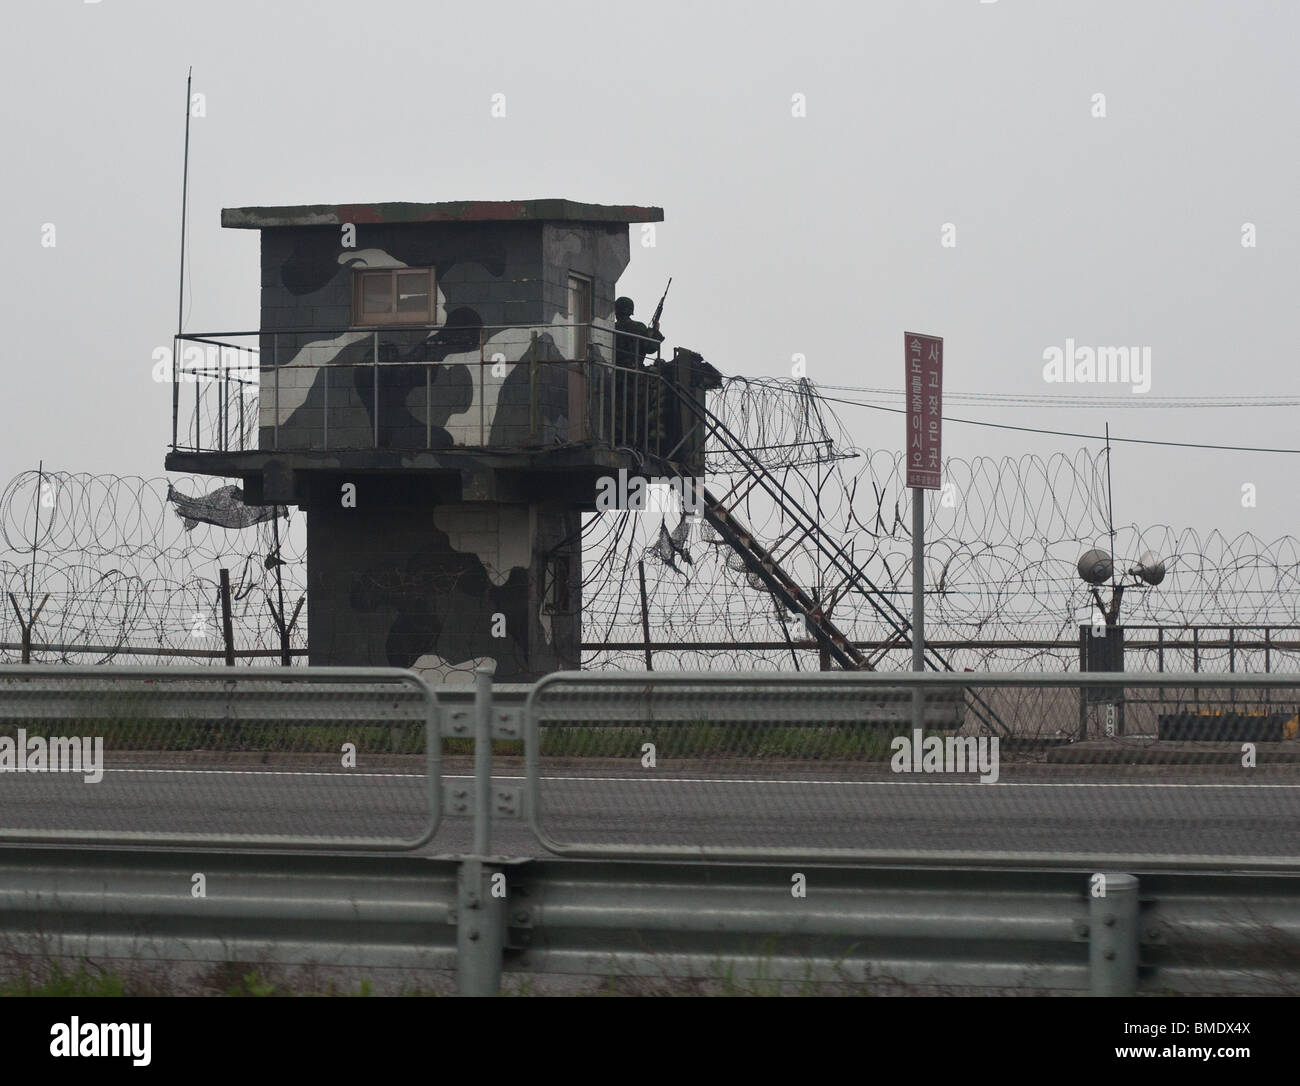 south-korea-guard-tower-at-the-border-of-the-dmz-demilitarized-zone-BMDX4X.jpg